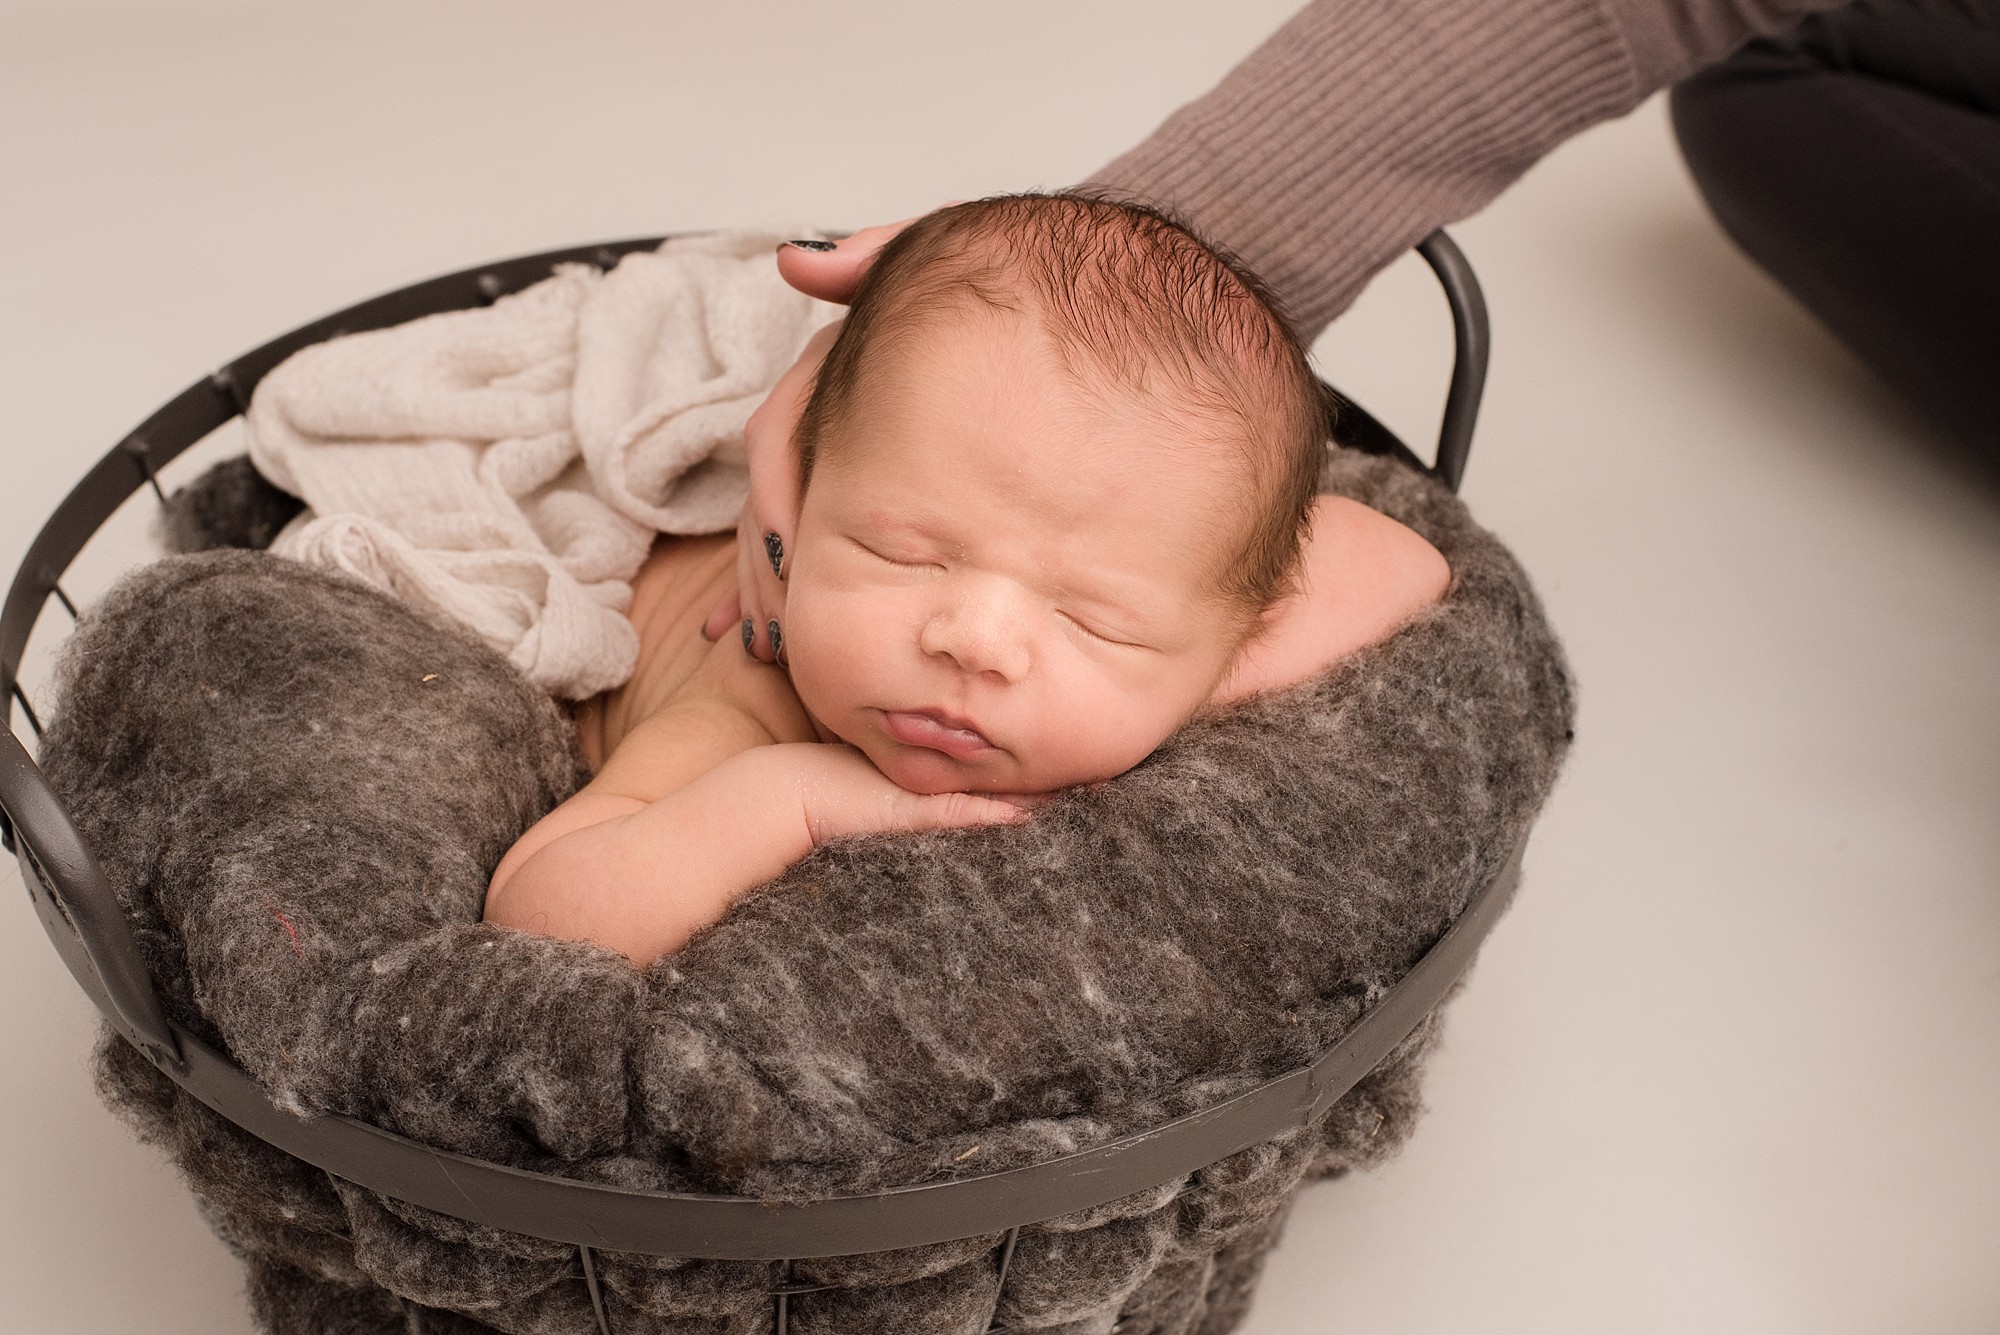 newborn baby being posed in a basket and someone is next to him keeping him safe